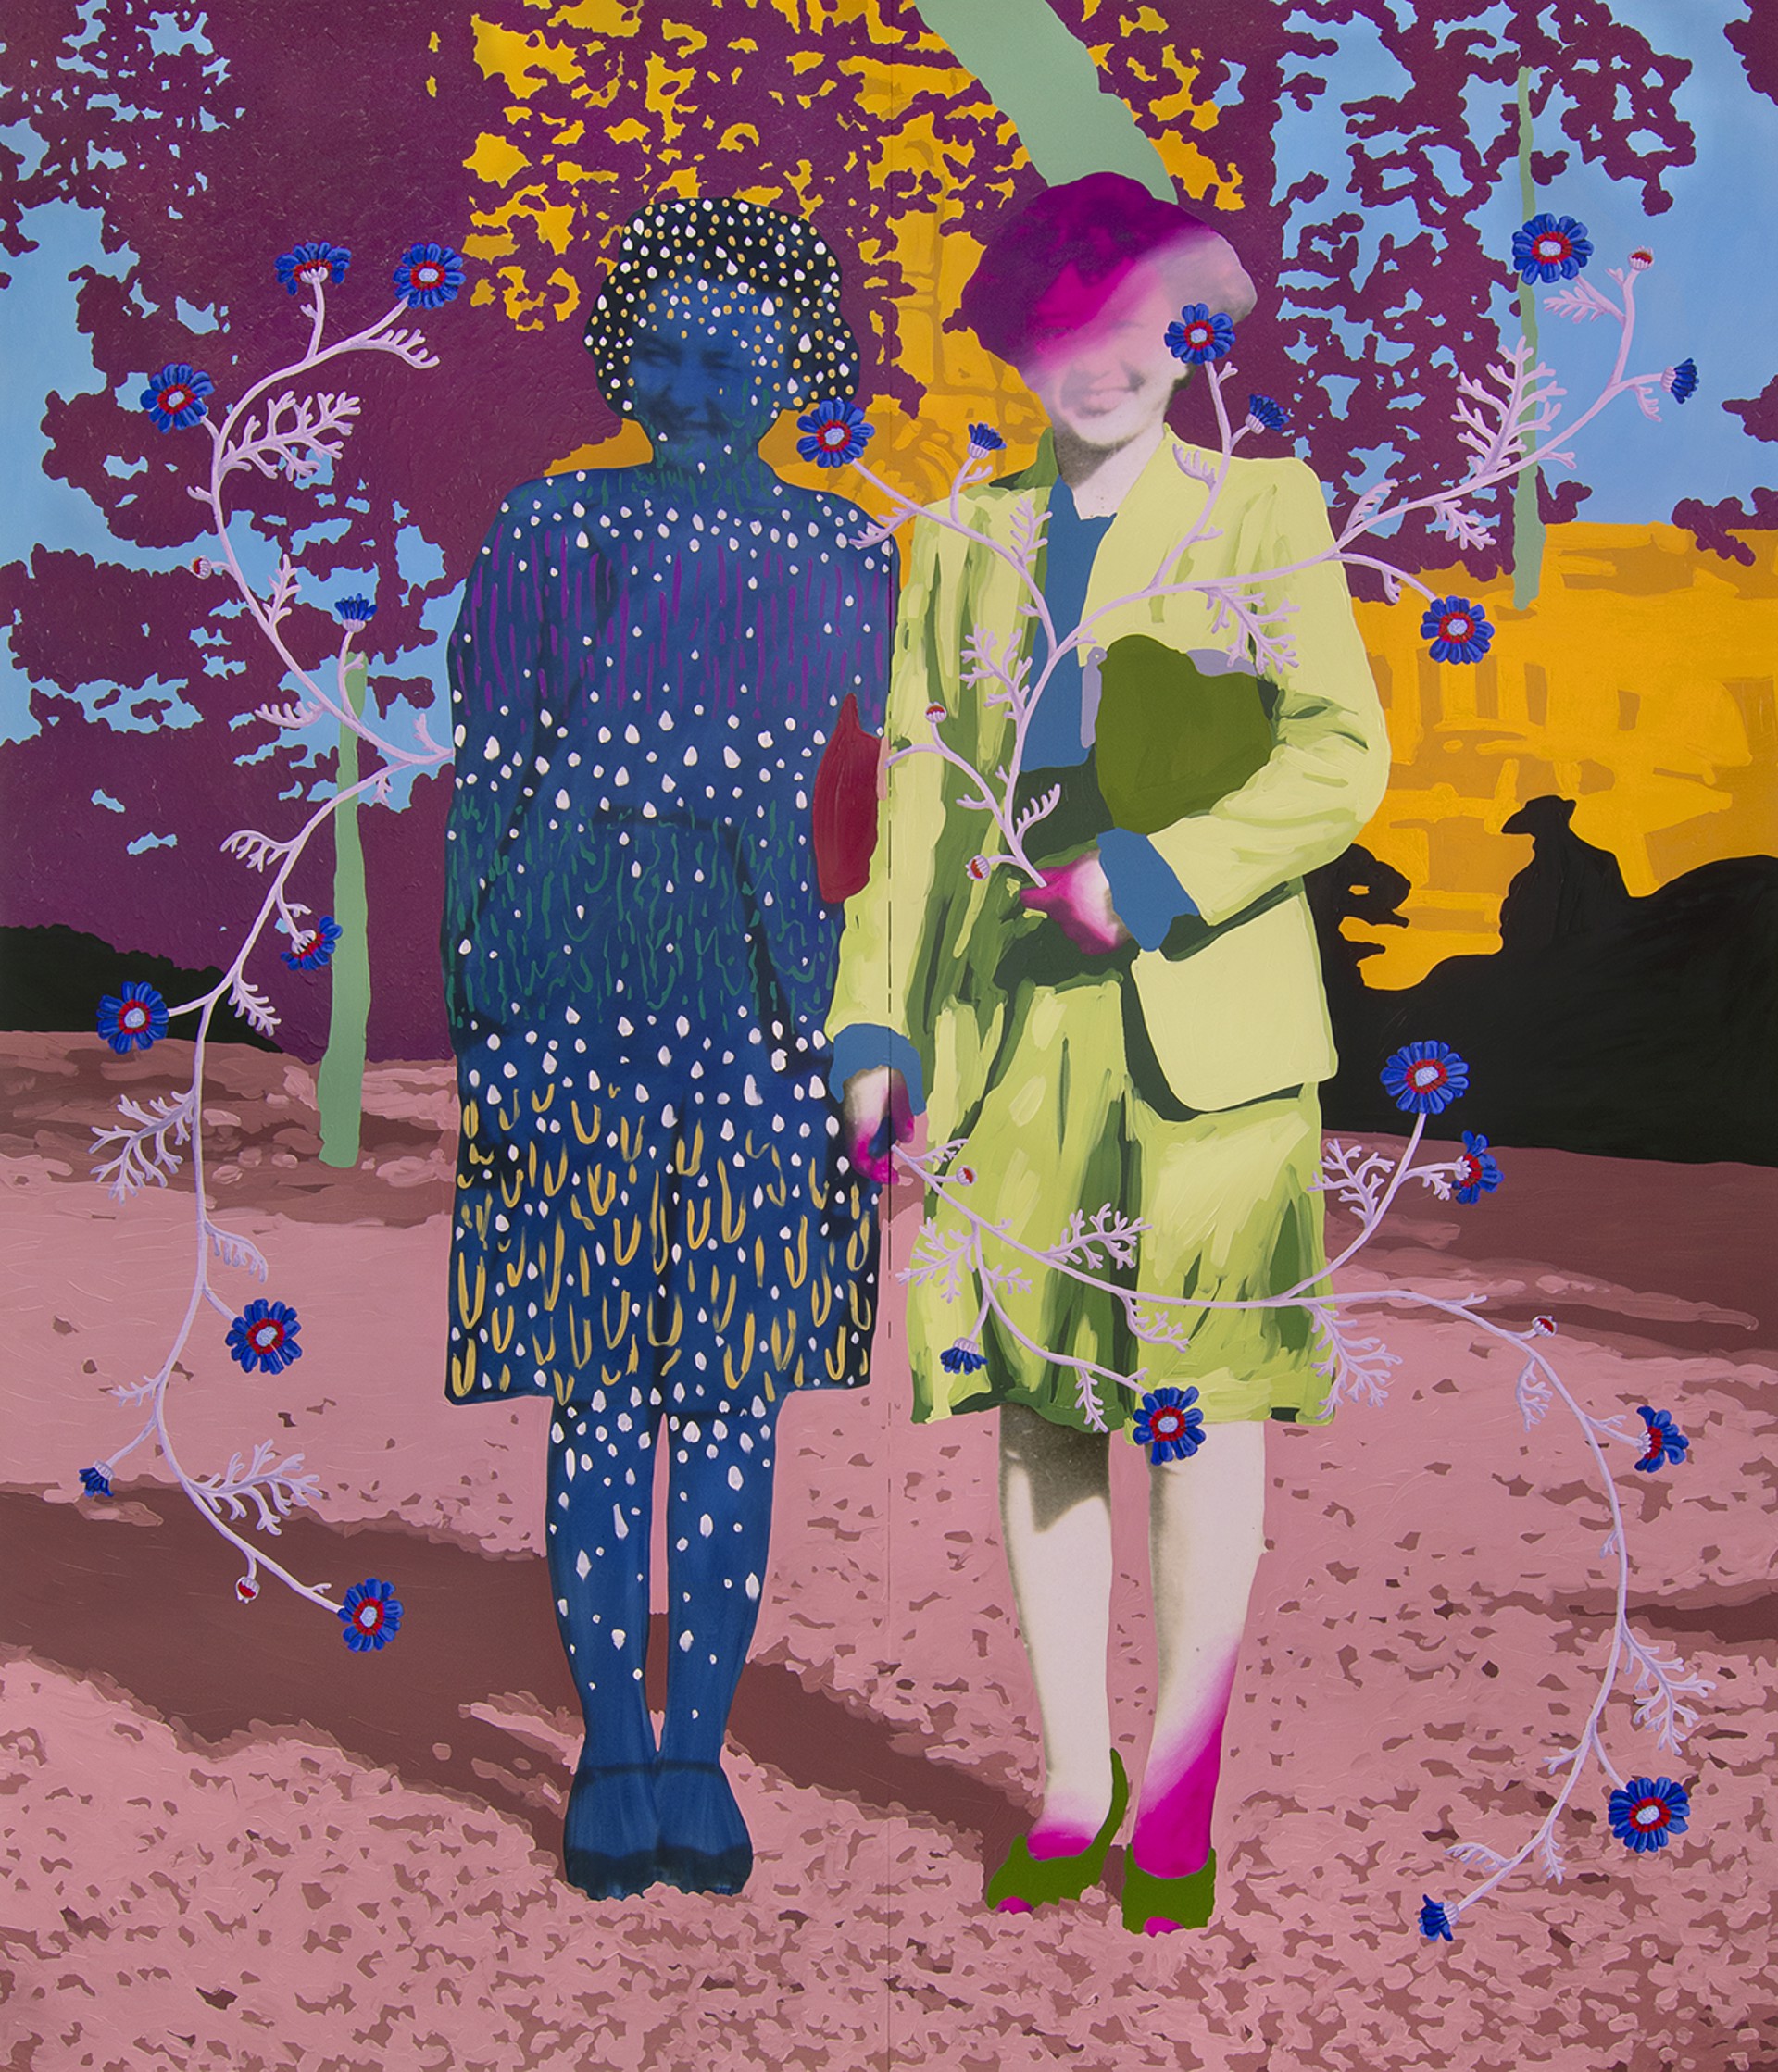 Commission_Untitled (Starling Woman and Color Fade Woman with Painted Daisies) by Daisy Patton